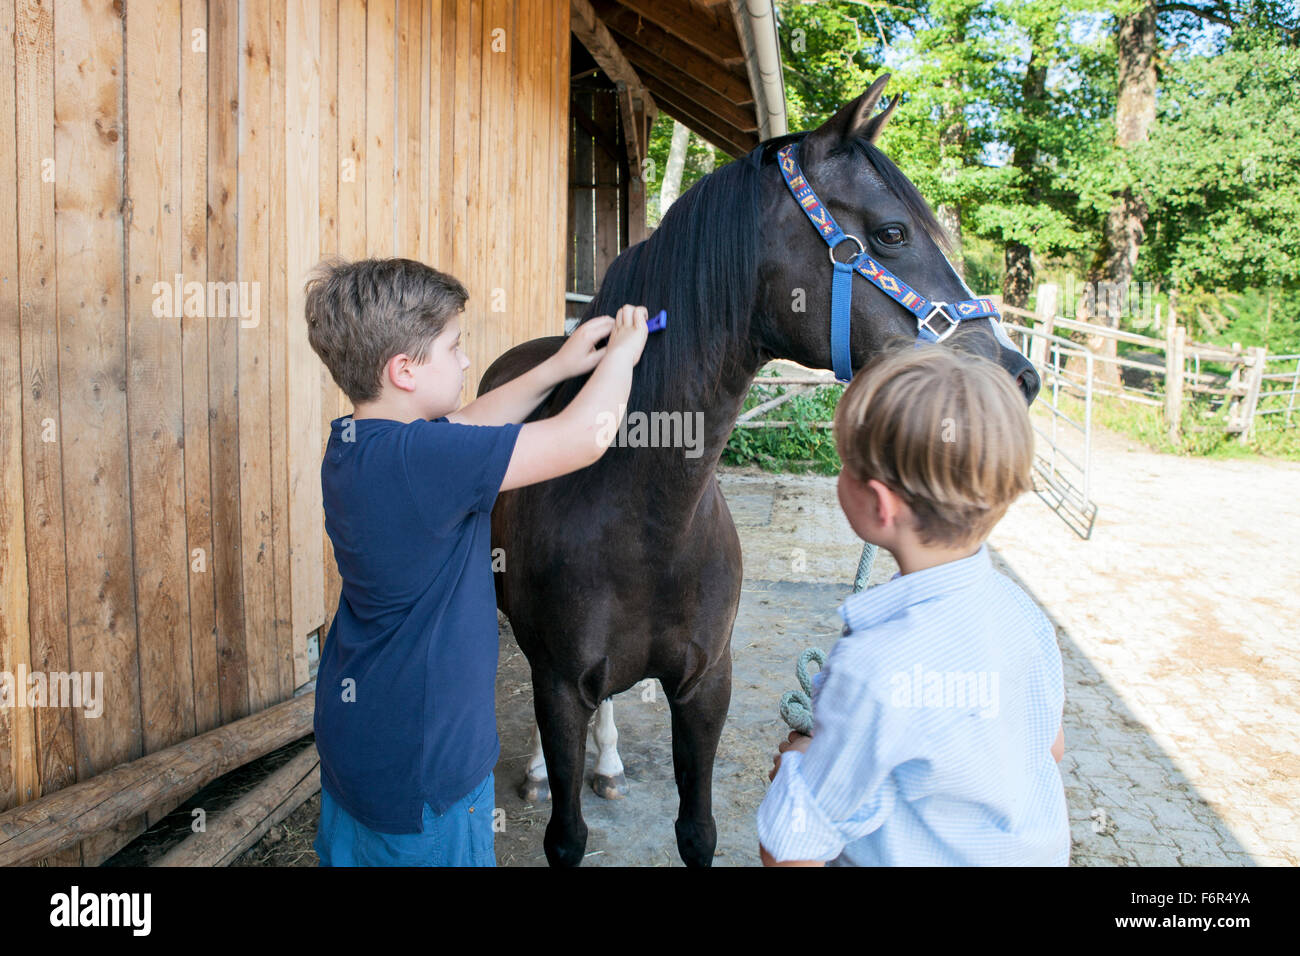 Two boys grooming horse together Stock Photo